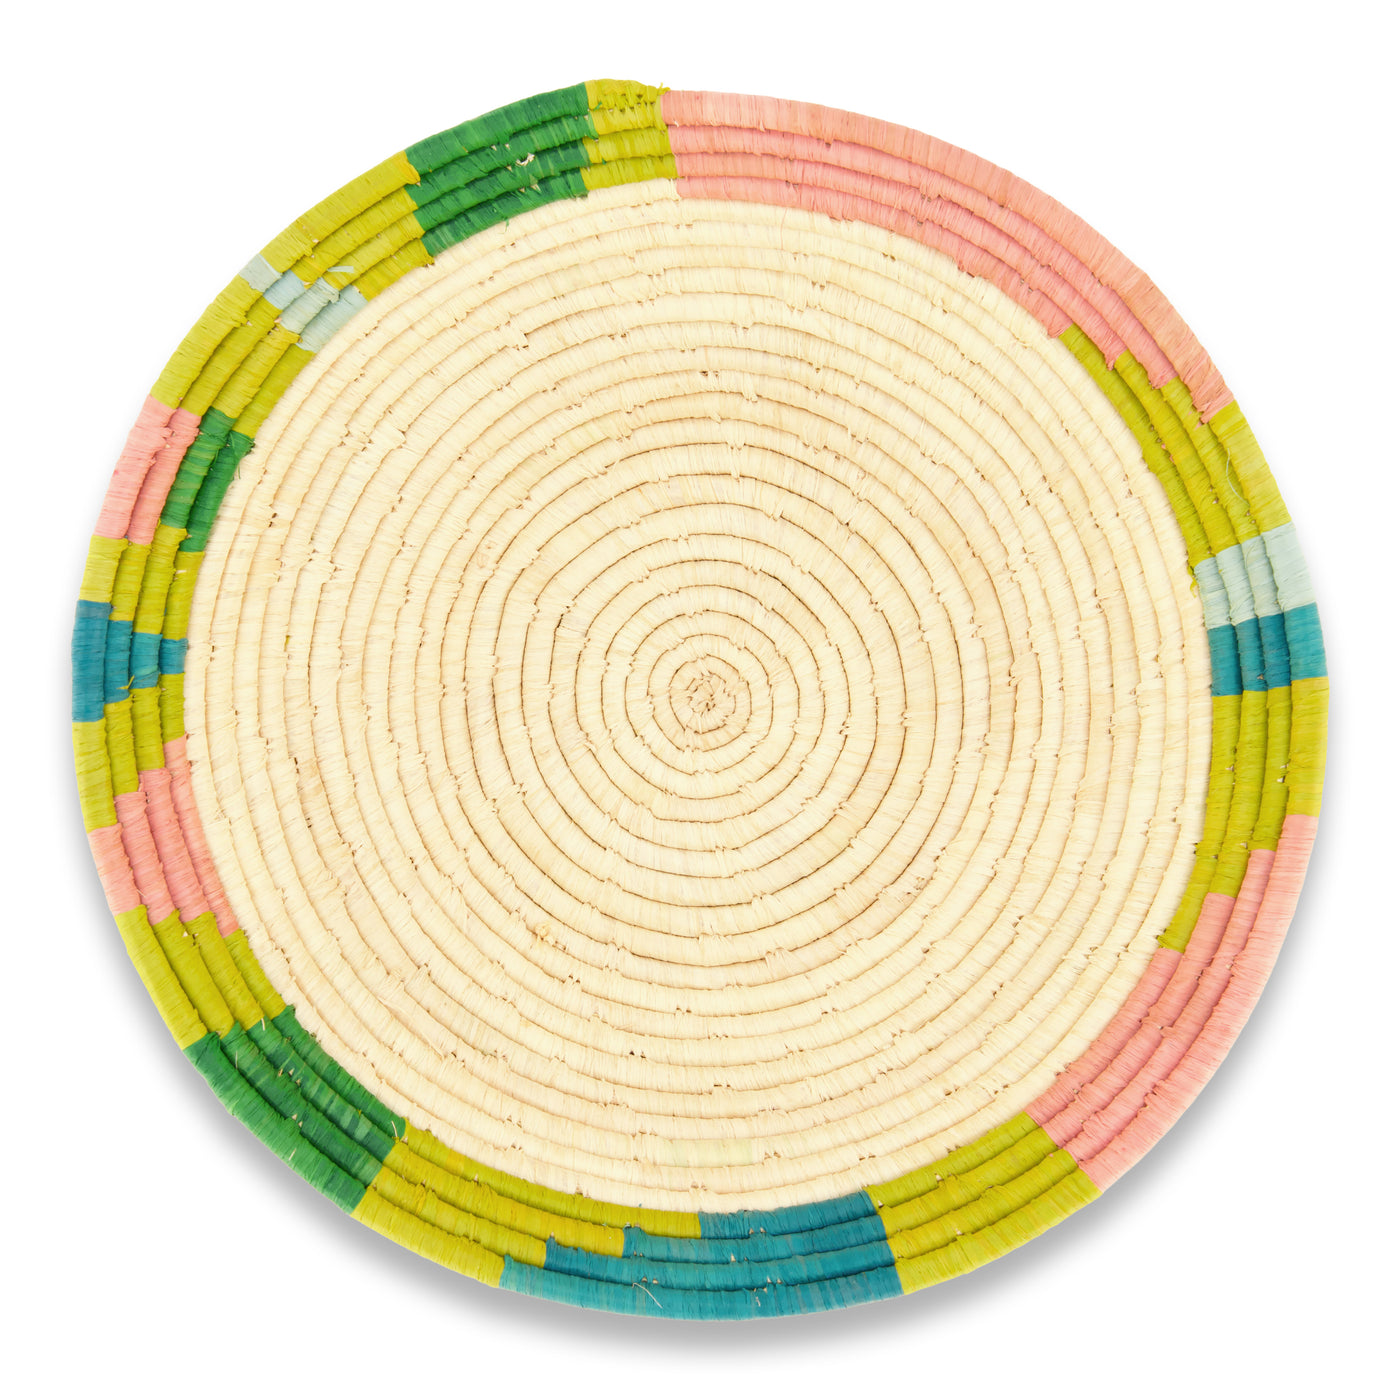 kazi seratonia woven bowl 10" paradisa mostly all natural raffia with a multicolor gentle patterned edge with moss and forest freen and pink